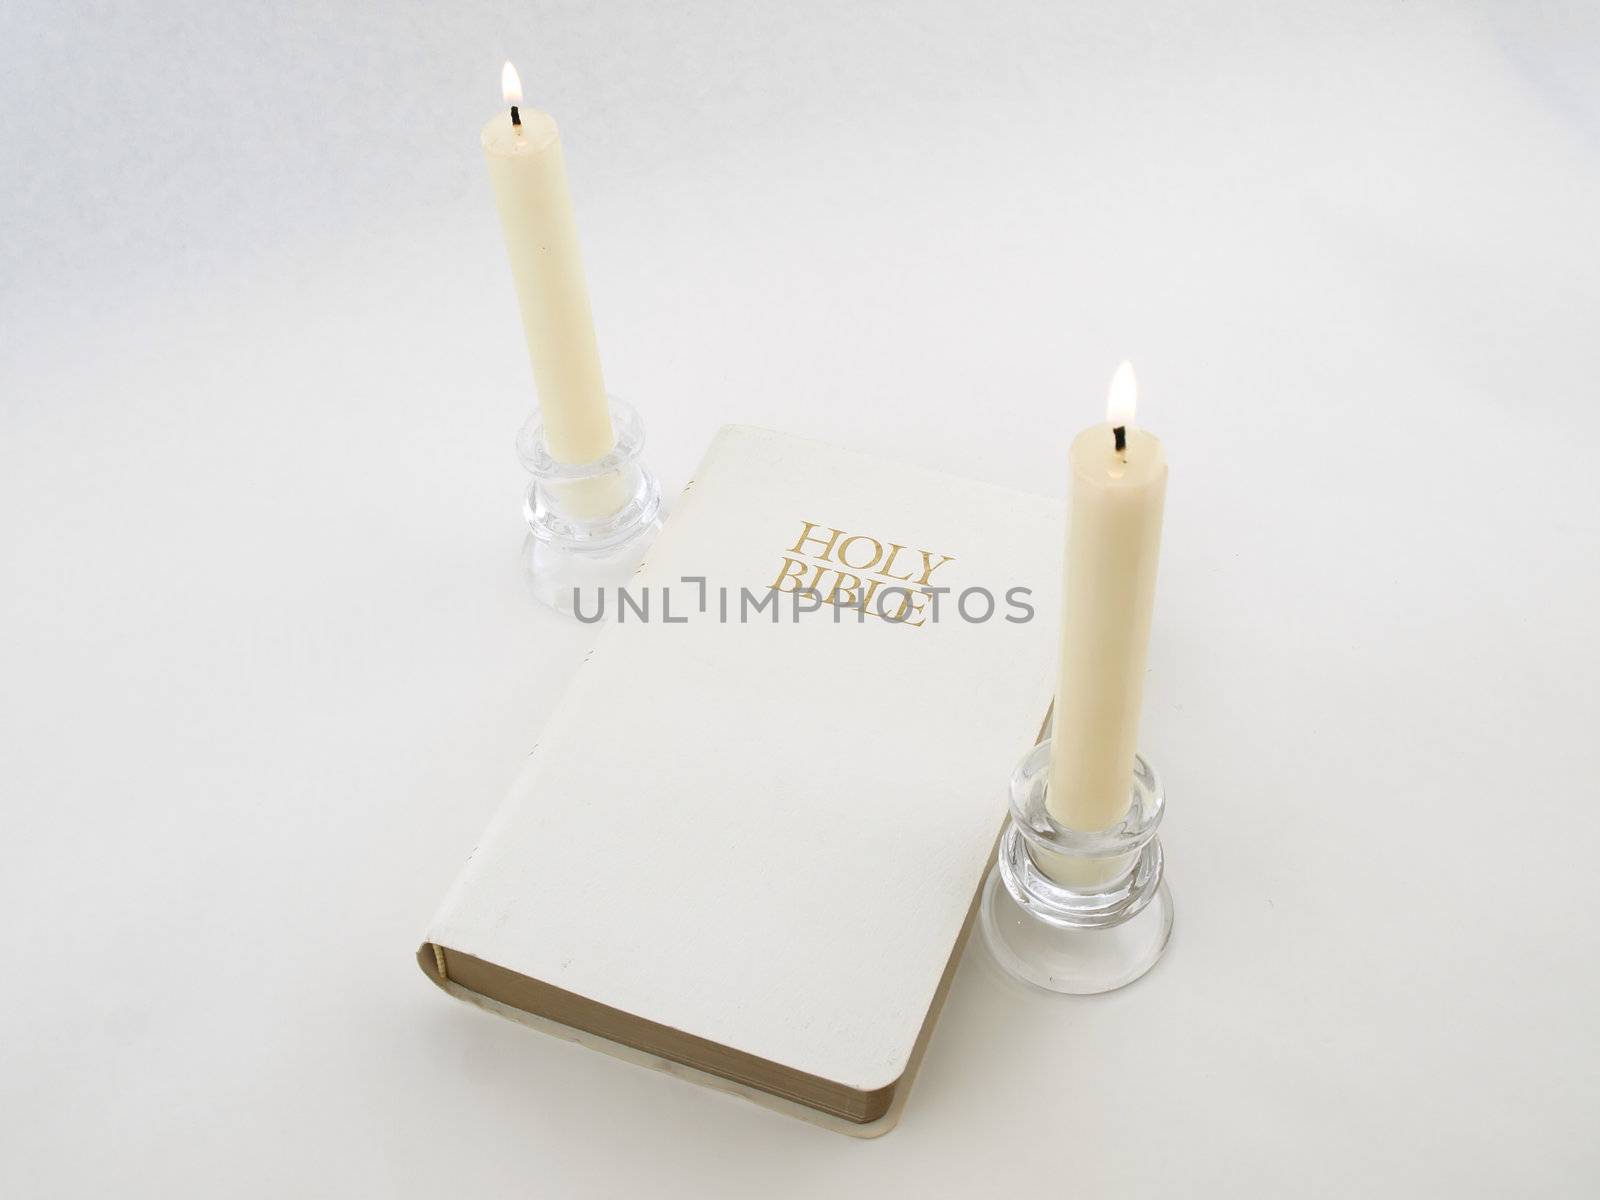 A white Holy Bible between two white lit candlesticks on a white background.